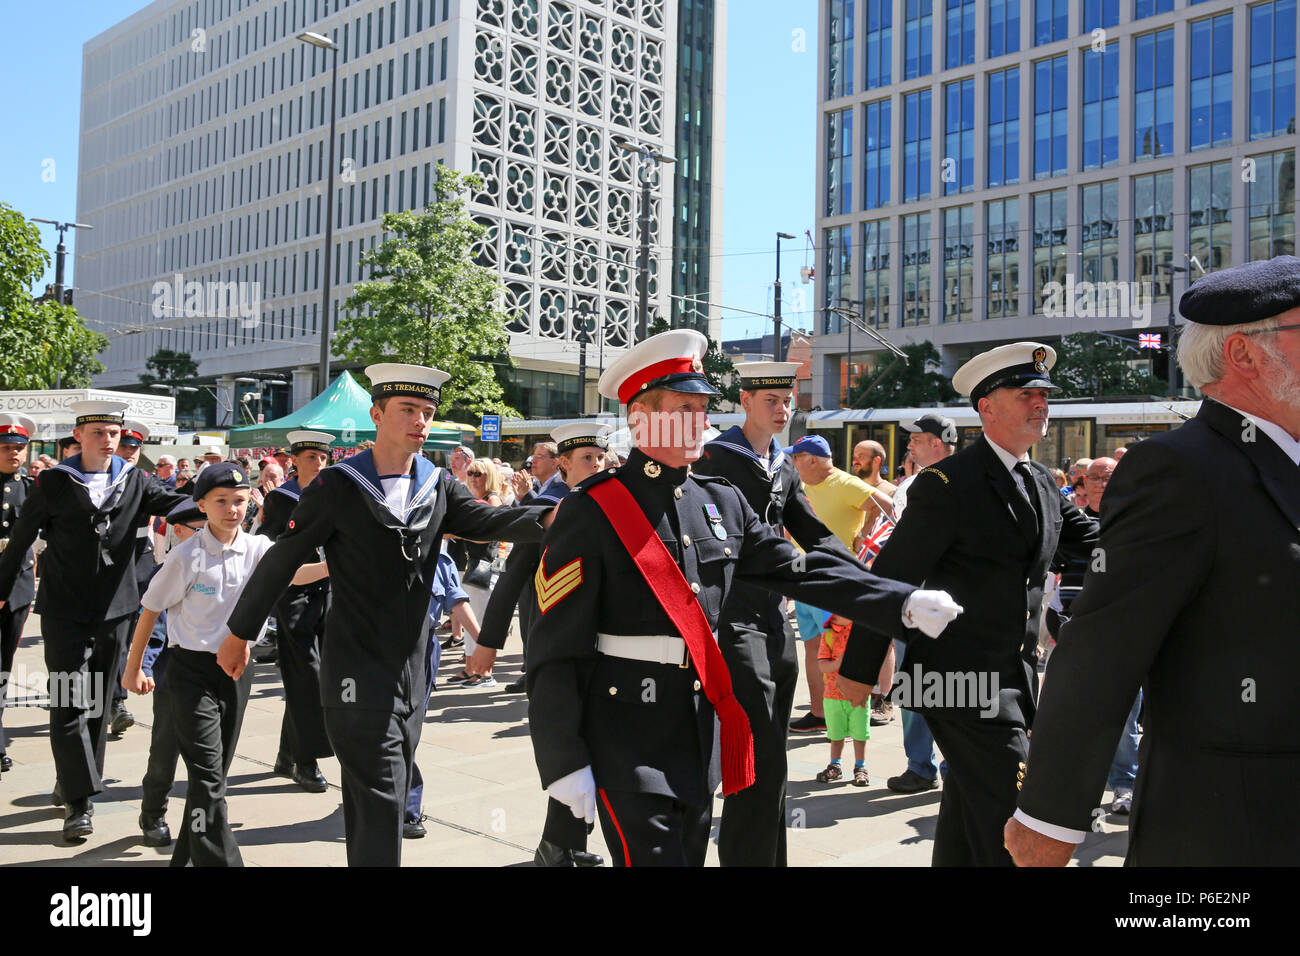 Manchester, UK, 30 June 2018. Members of the Navy parade during celebrations of Armed Forces Day where the public are given the opportunity to meet members of the armed forces and talk to them about the work they do, St Peters Square, Manchester, 30th June, 2018 (C)Barbara Cook/Alamy Live News Stock Photo